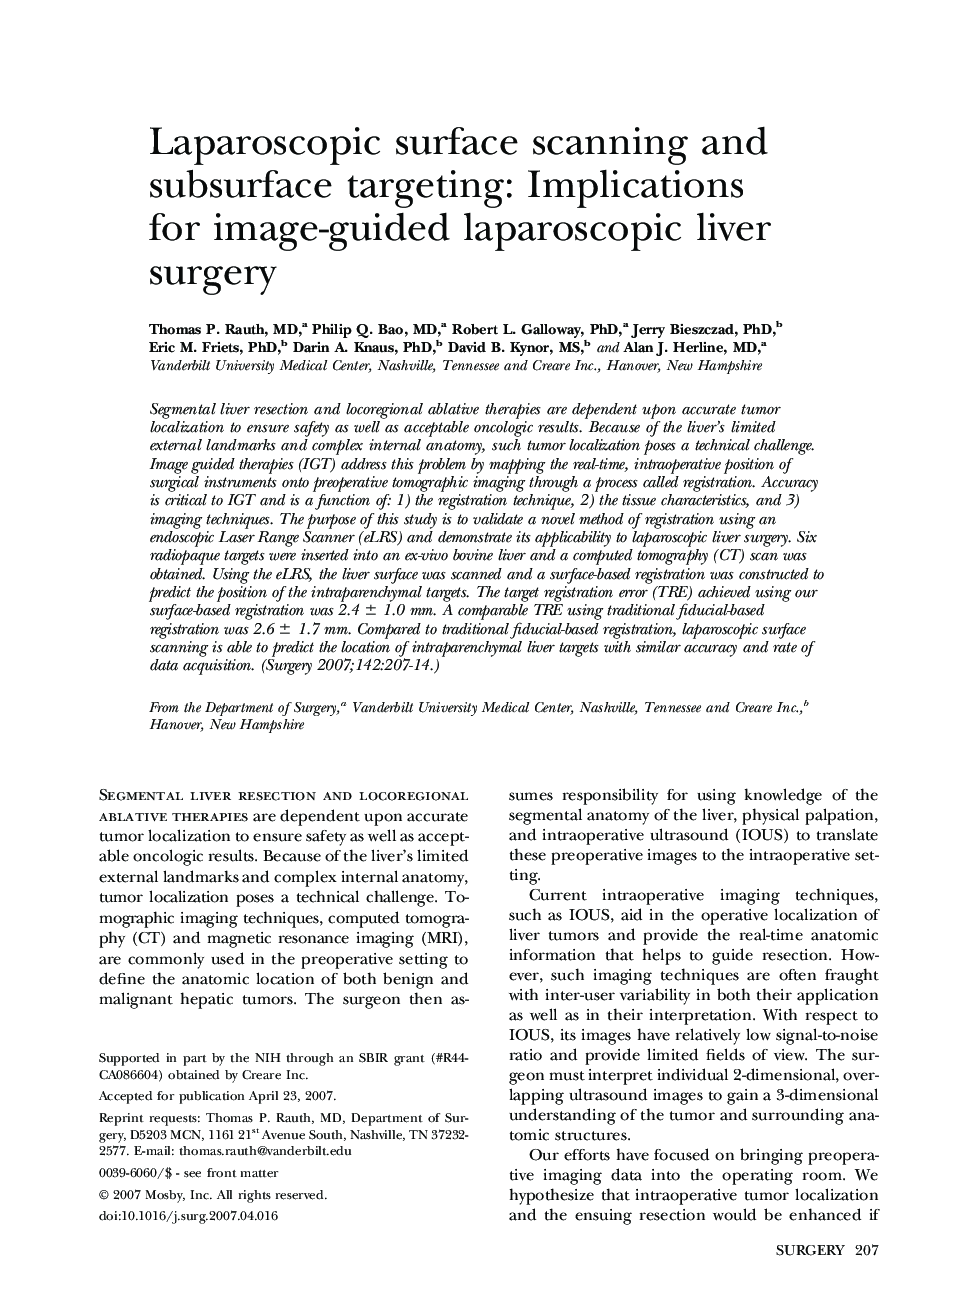 Laparoscopic surface scanning and subsurface targeting: Implications for image-guided laparoscopic liver surgery 